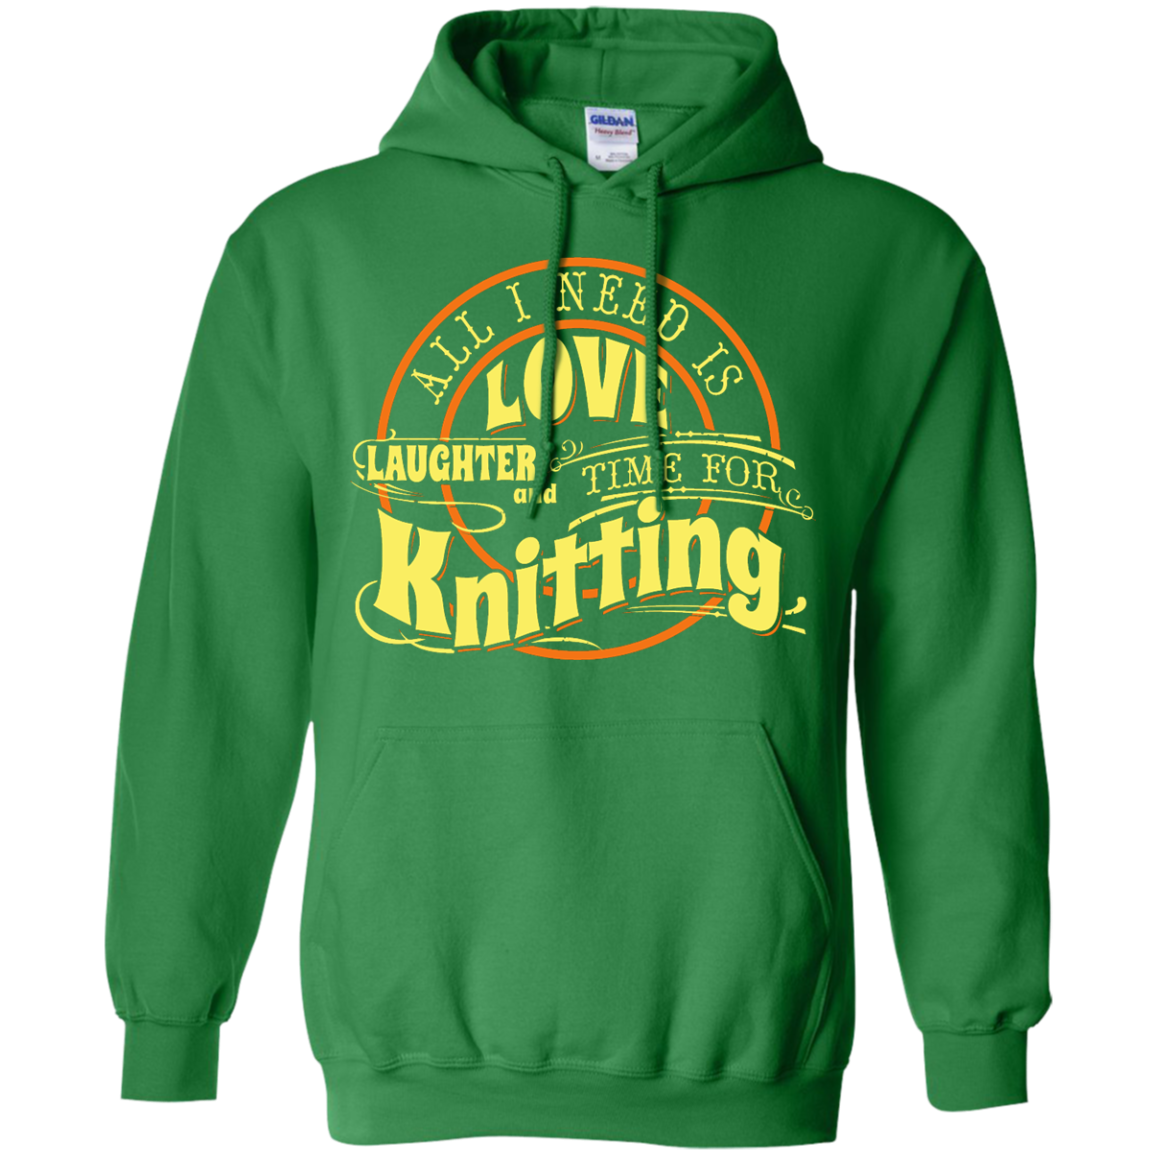 Time for Knitting (yellow) Pullover Hoodies - Crafter4Life - 6